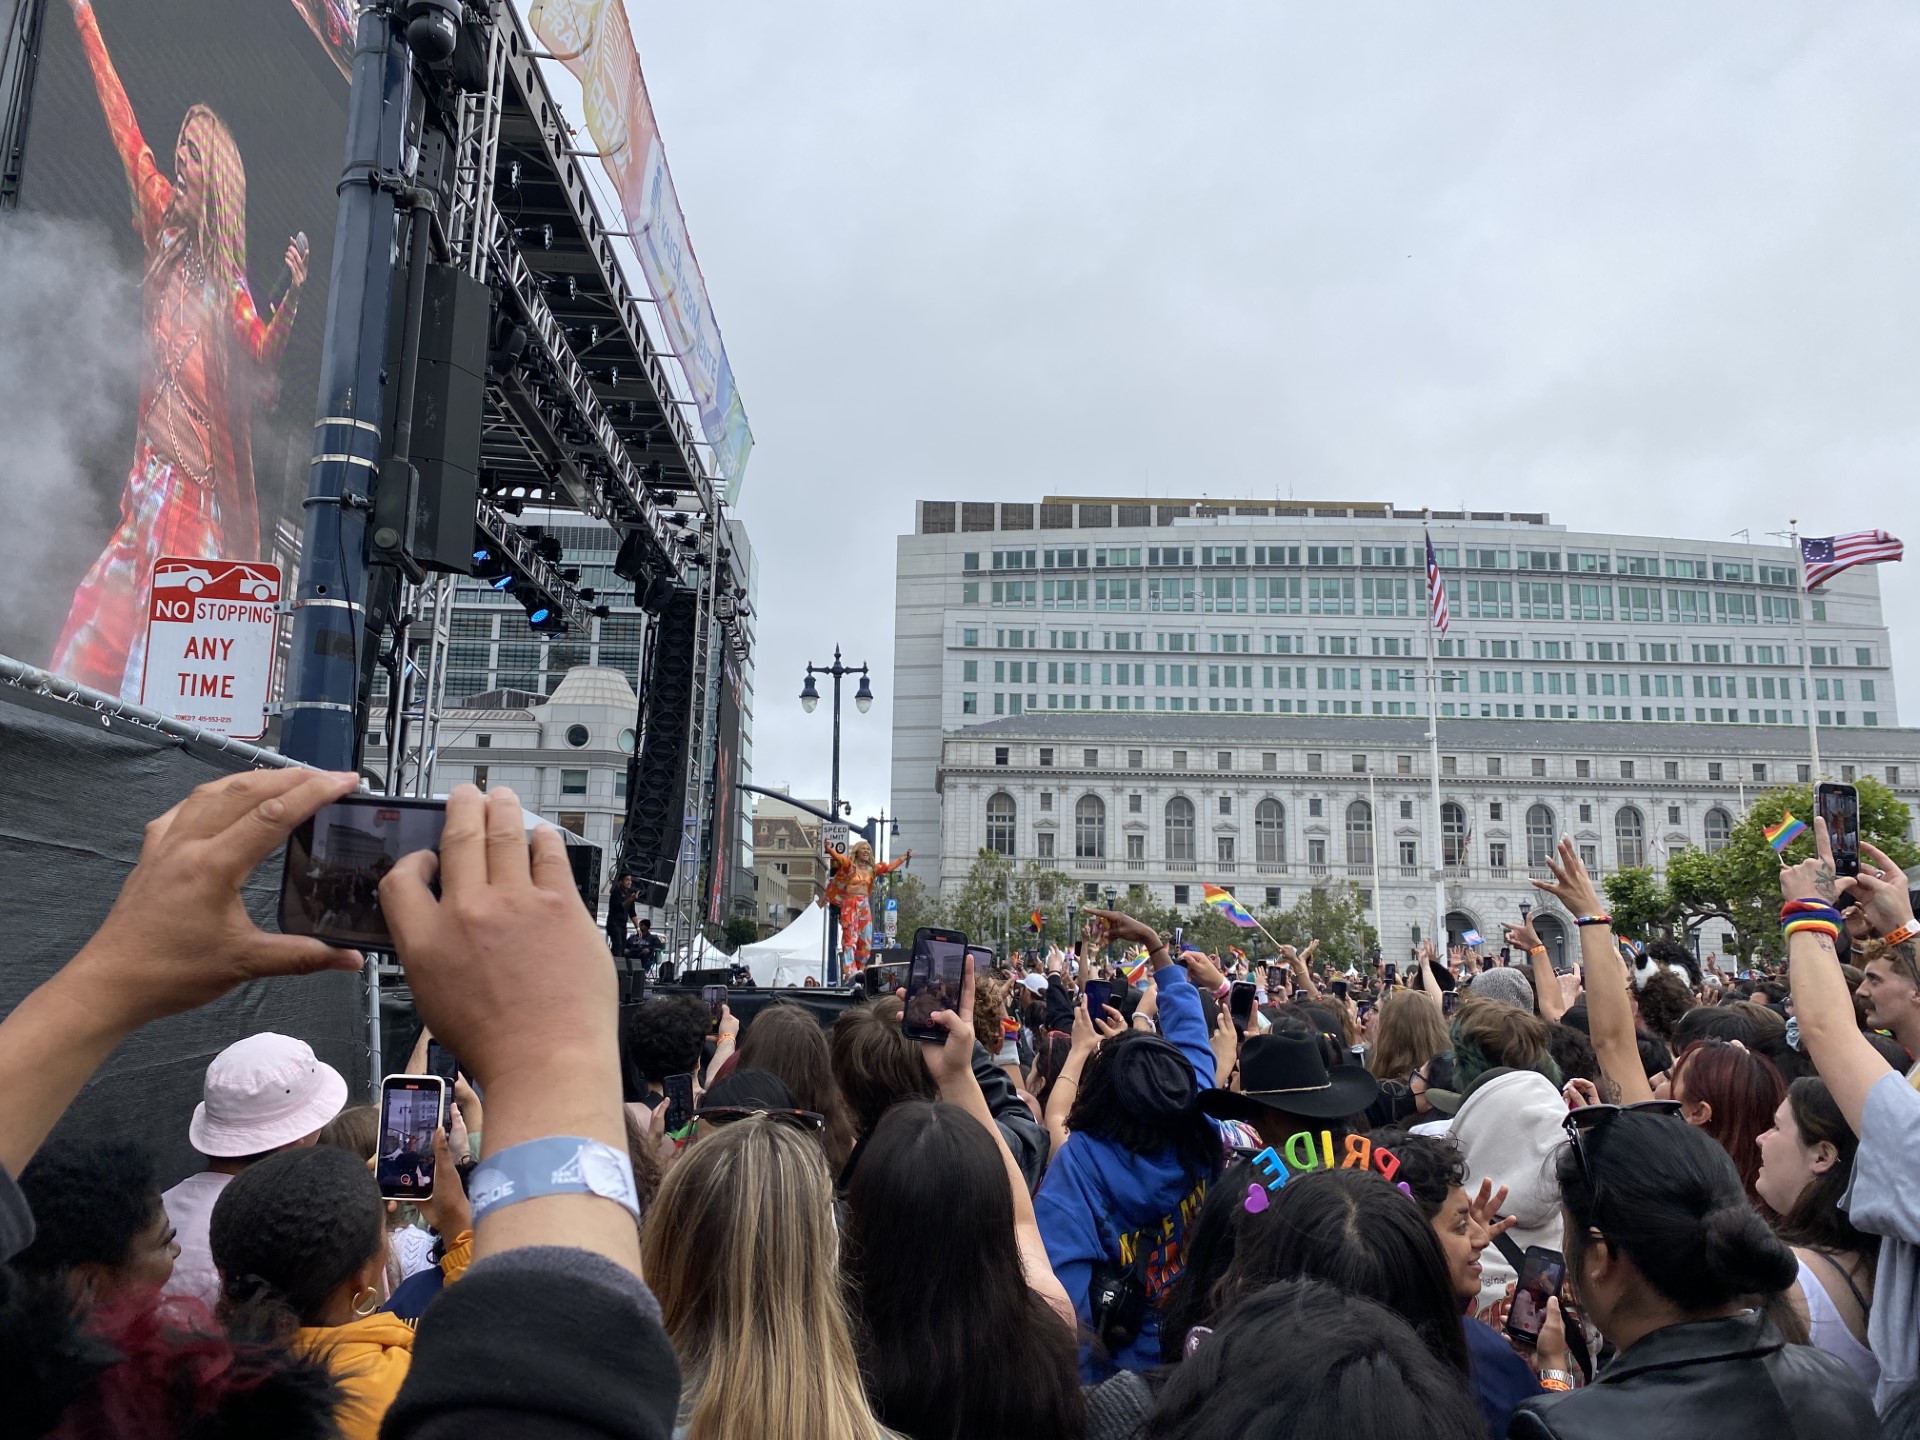 Hayley Kiyoko performs on a stage in San Francisco at the Pride Celebrations in an orange outfit while onlookers hold up their cell phones